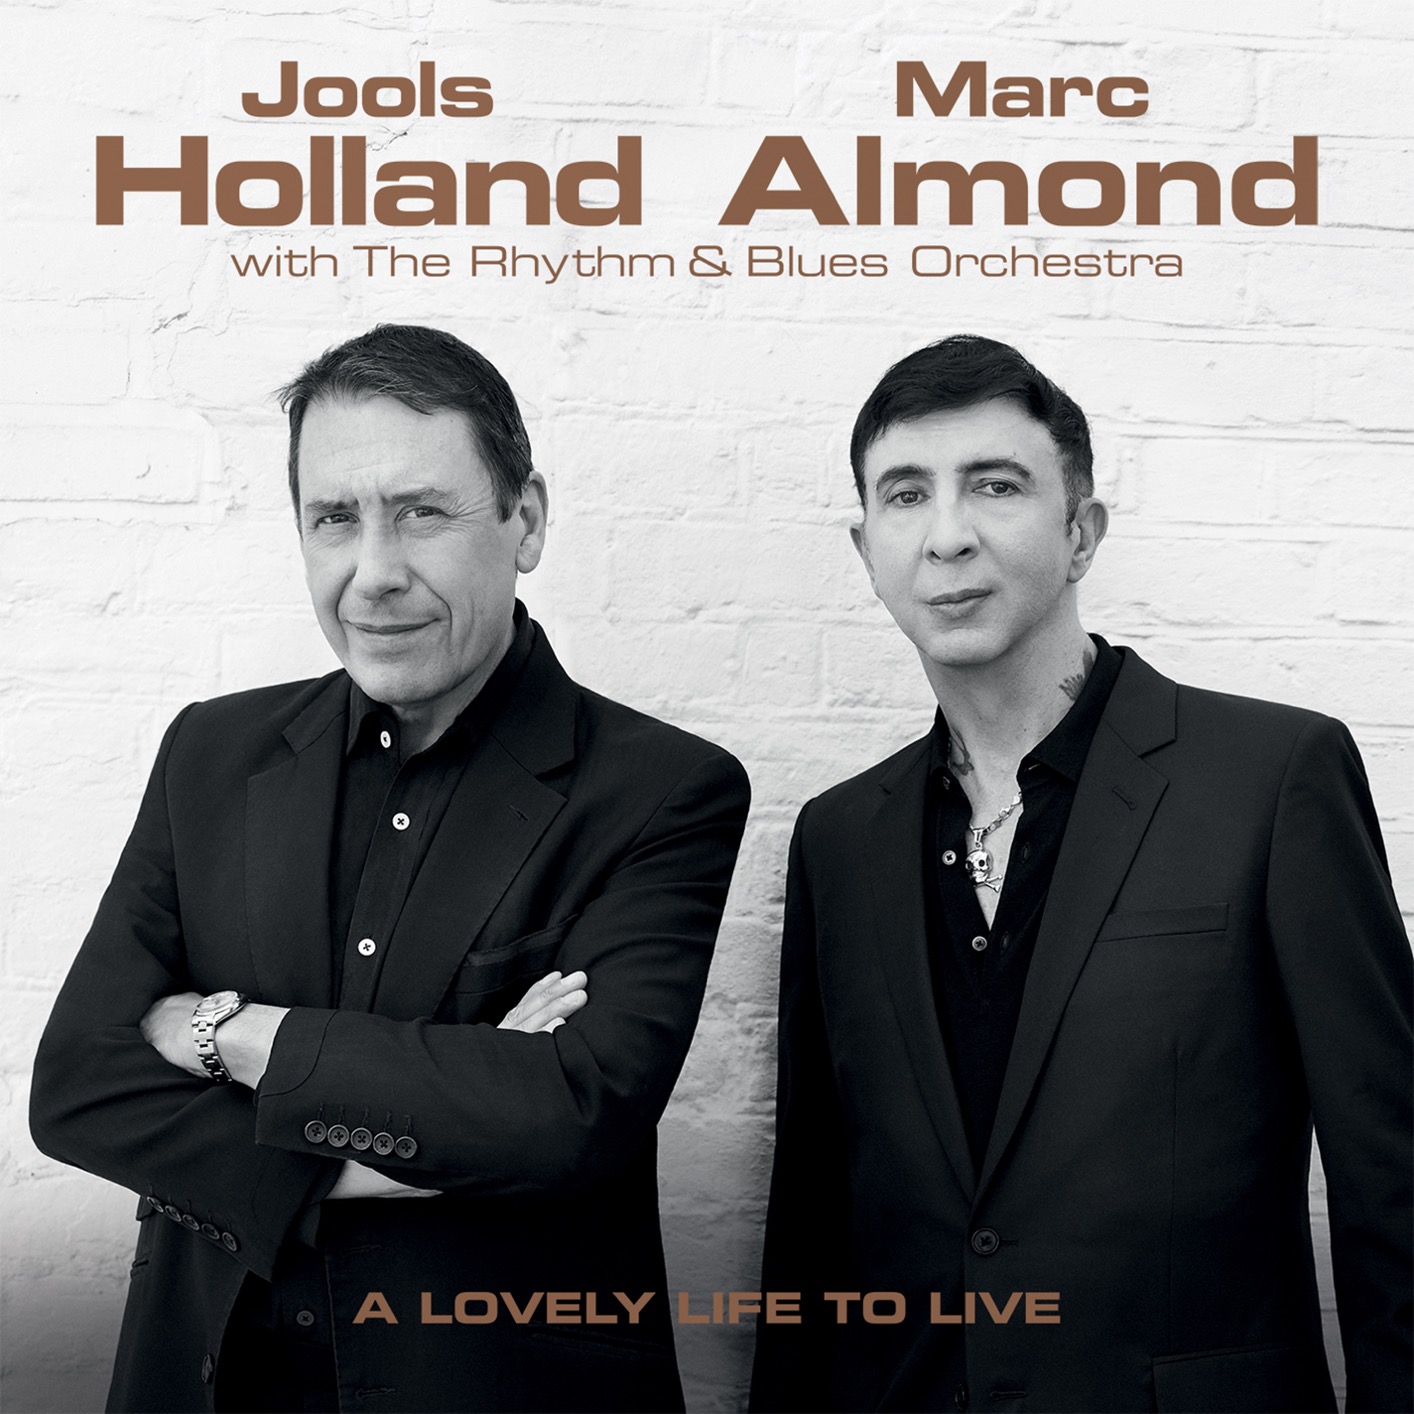 Jools Holland & Marc Almond – A Lovely Life to Live (2018) [FLAC 24bit/96kHz]